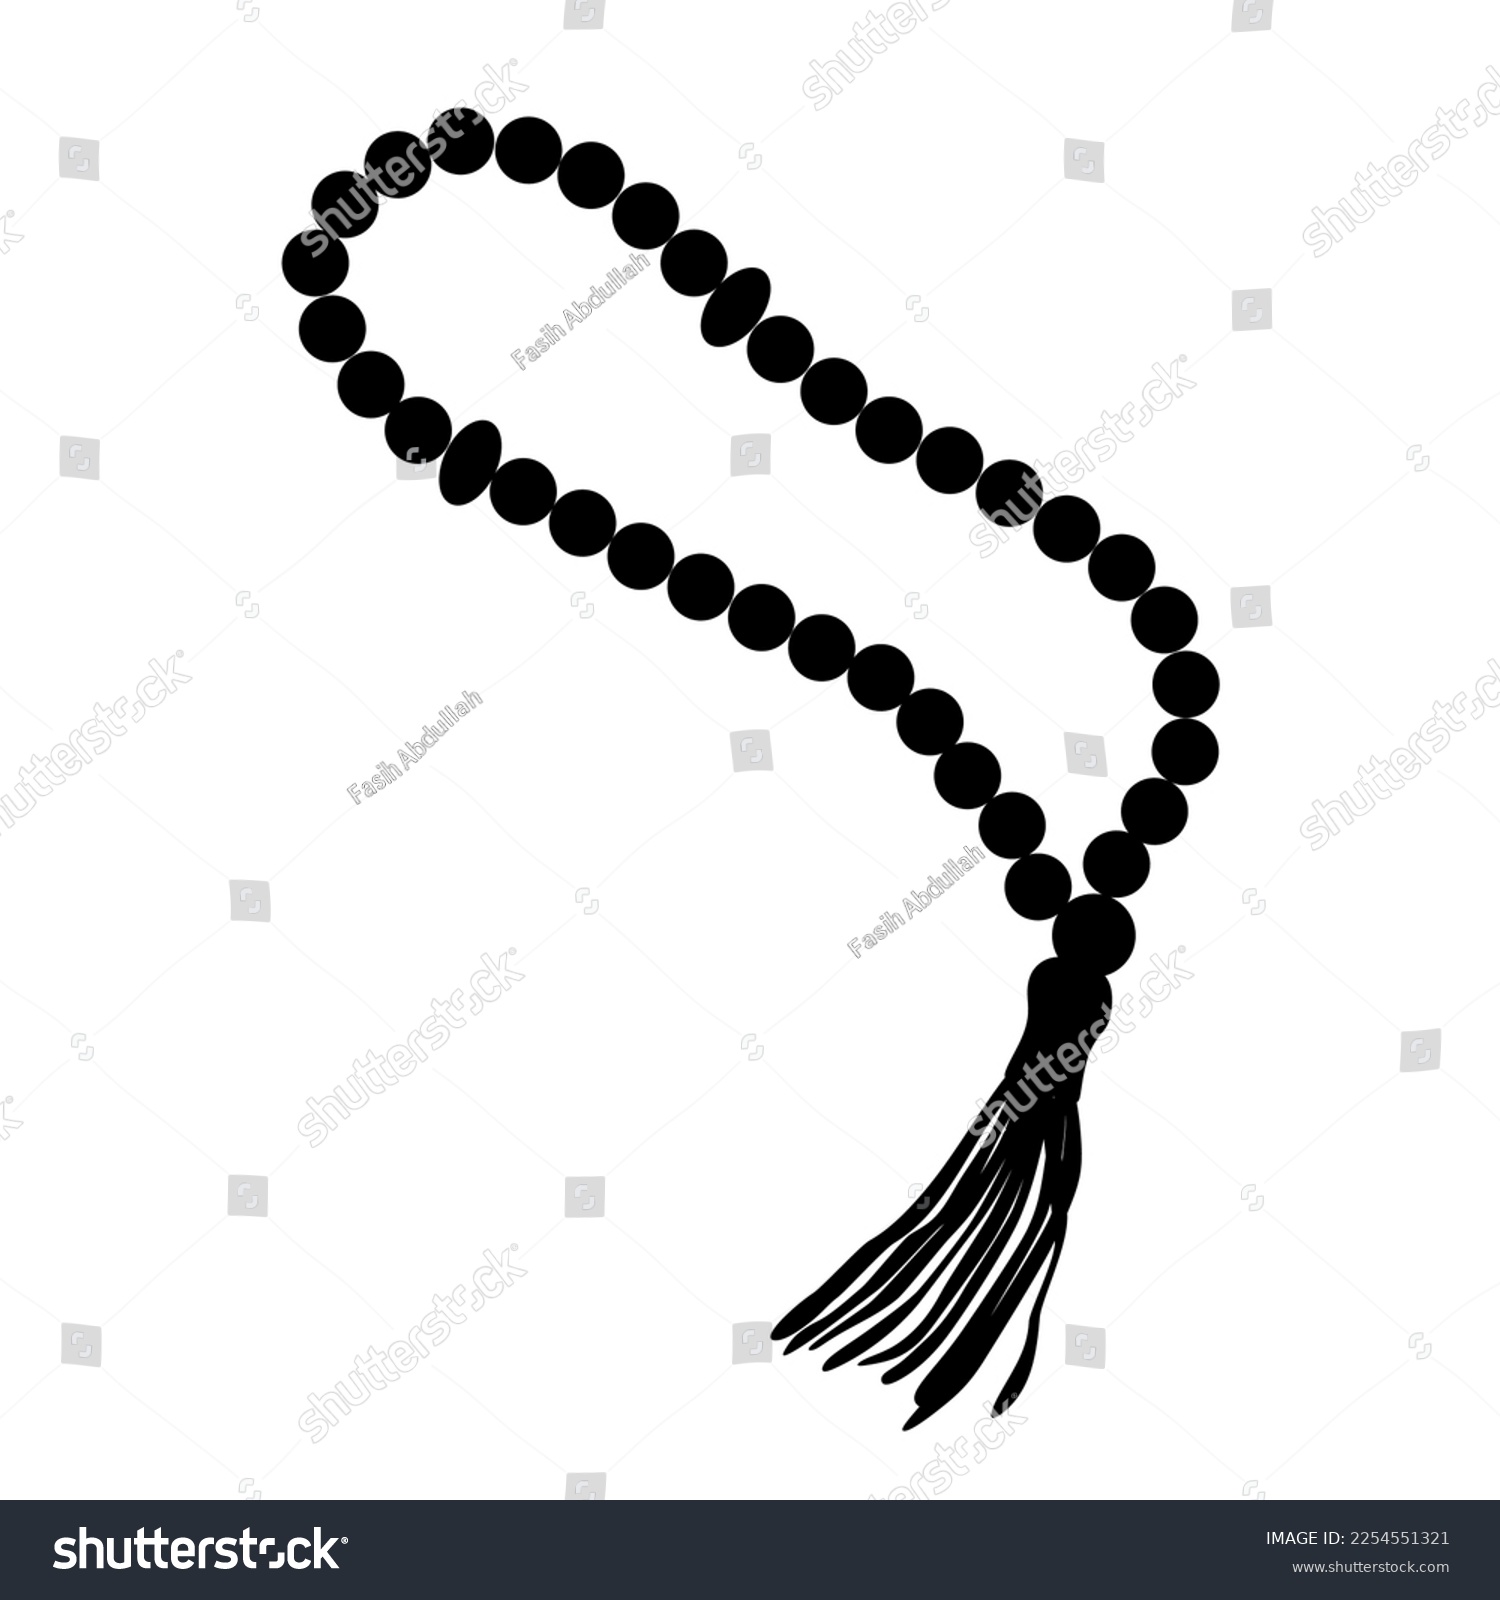 SVG of The best tasbeeh islamic rosary silhouette vector illustration in trendy style. Editable graphic resources for many purposes. svg